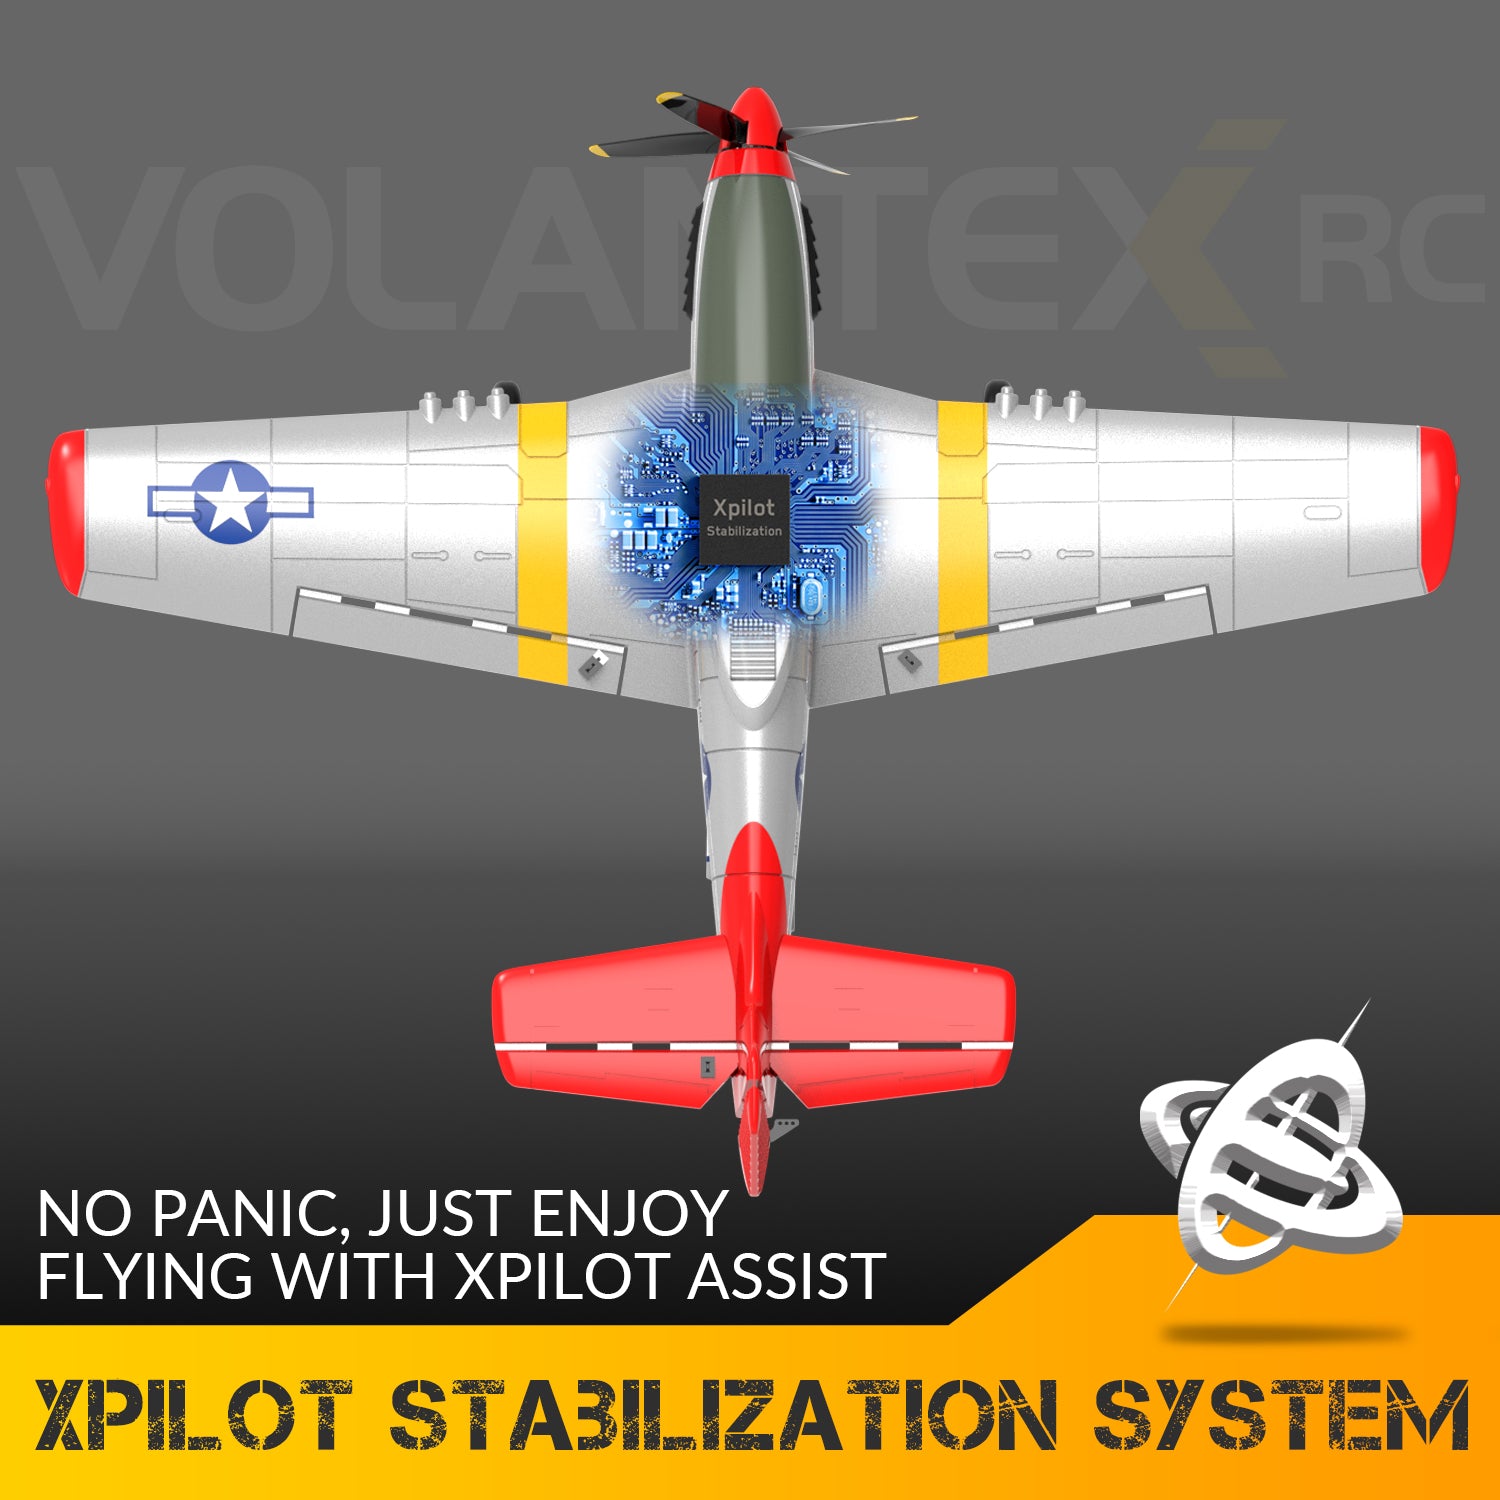 VOLANTEXRC Mustang P51 Easy Fly Warbird Beginner RC Airplane with Gyro Stabilizer Great Gift